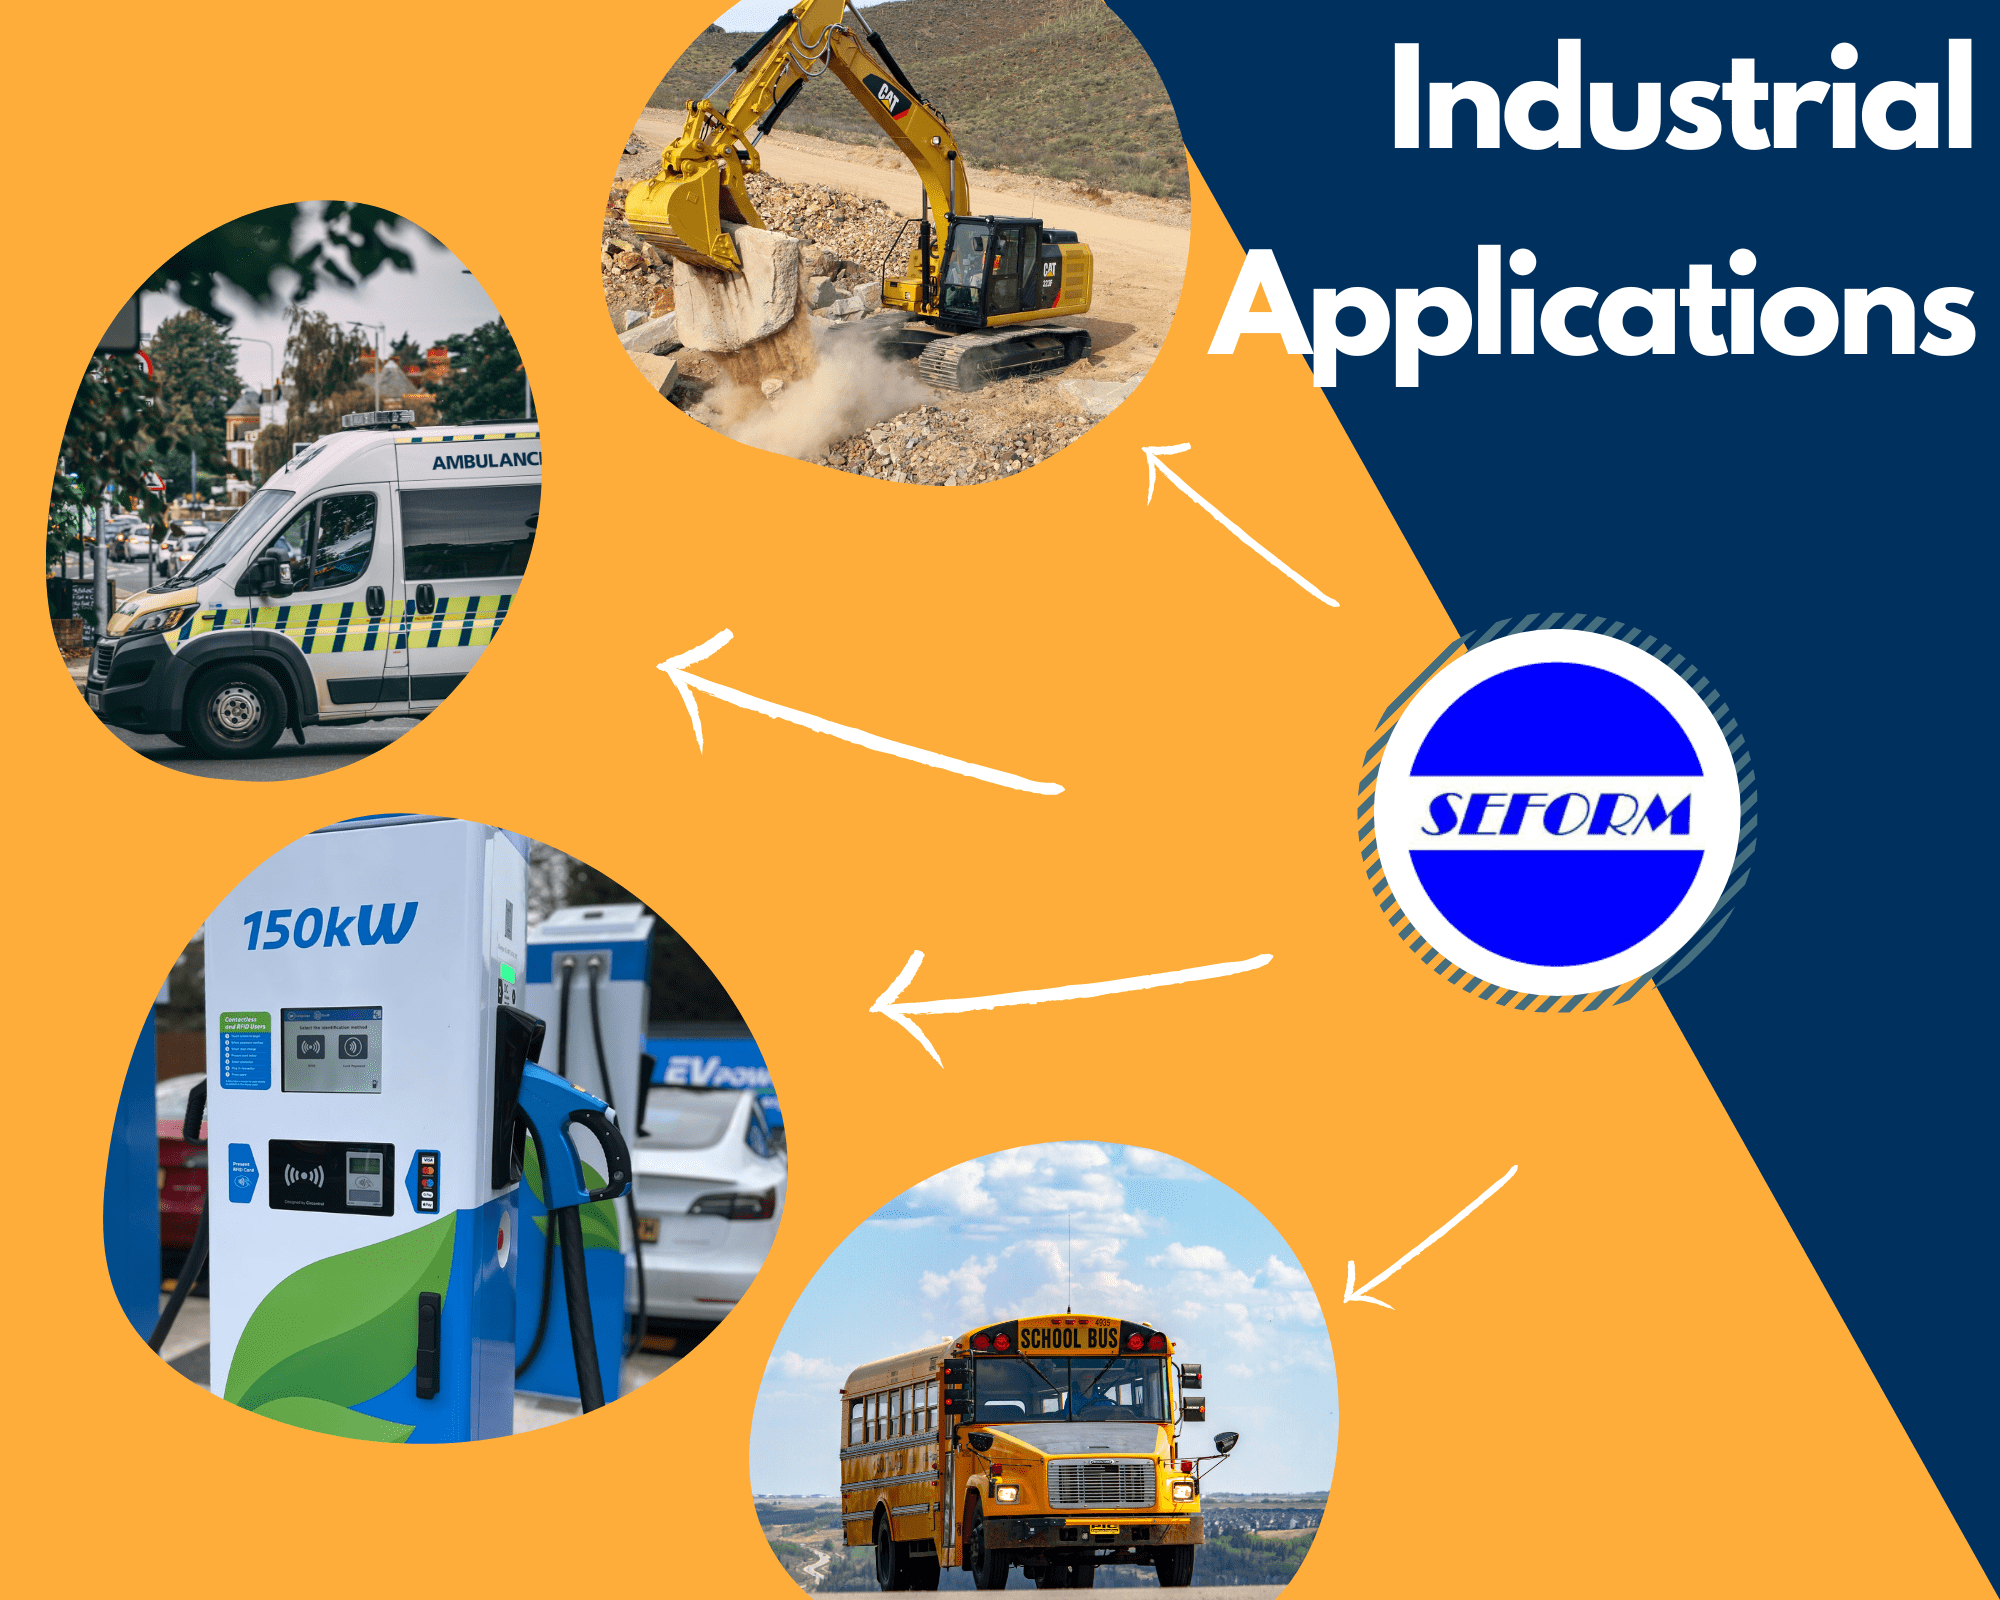 industrial applications include excavator, ambulance, ev charger station, school bus.